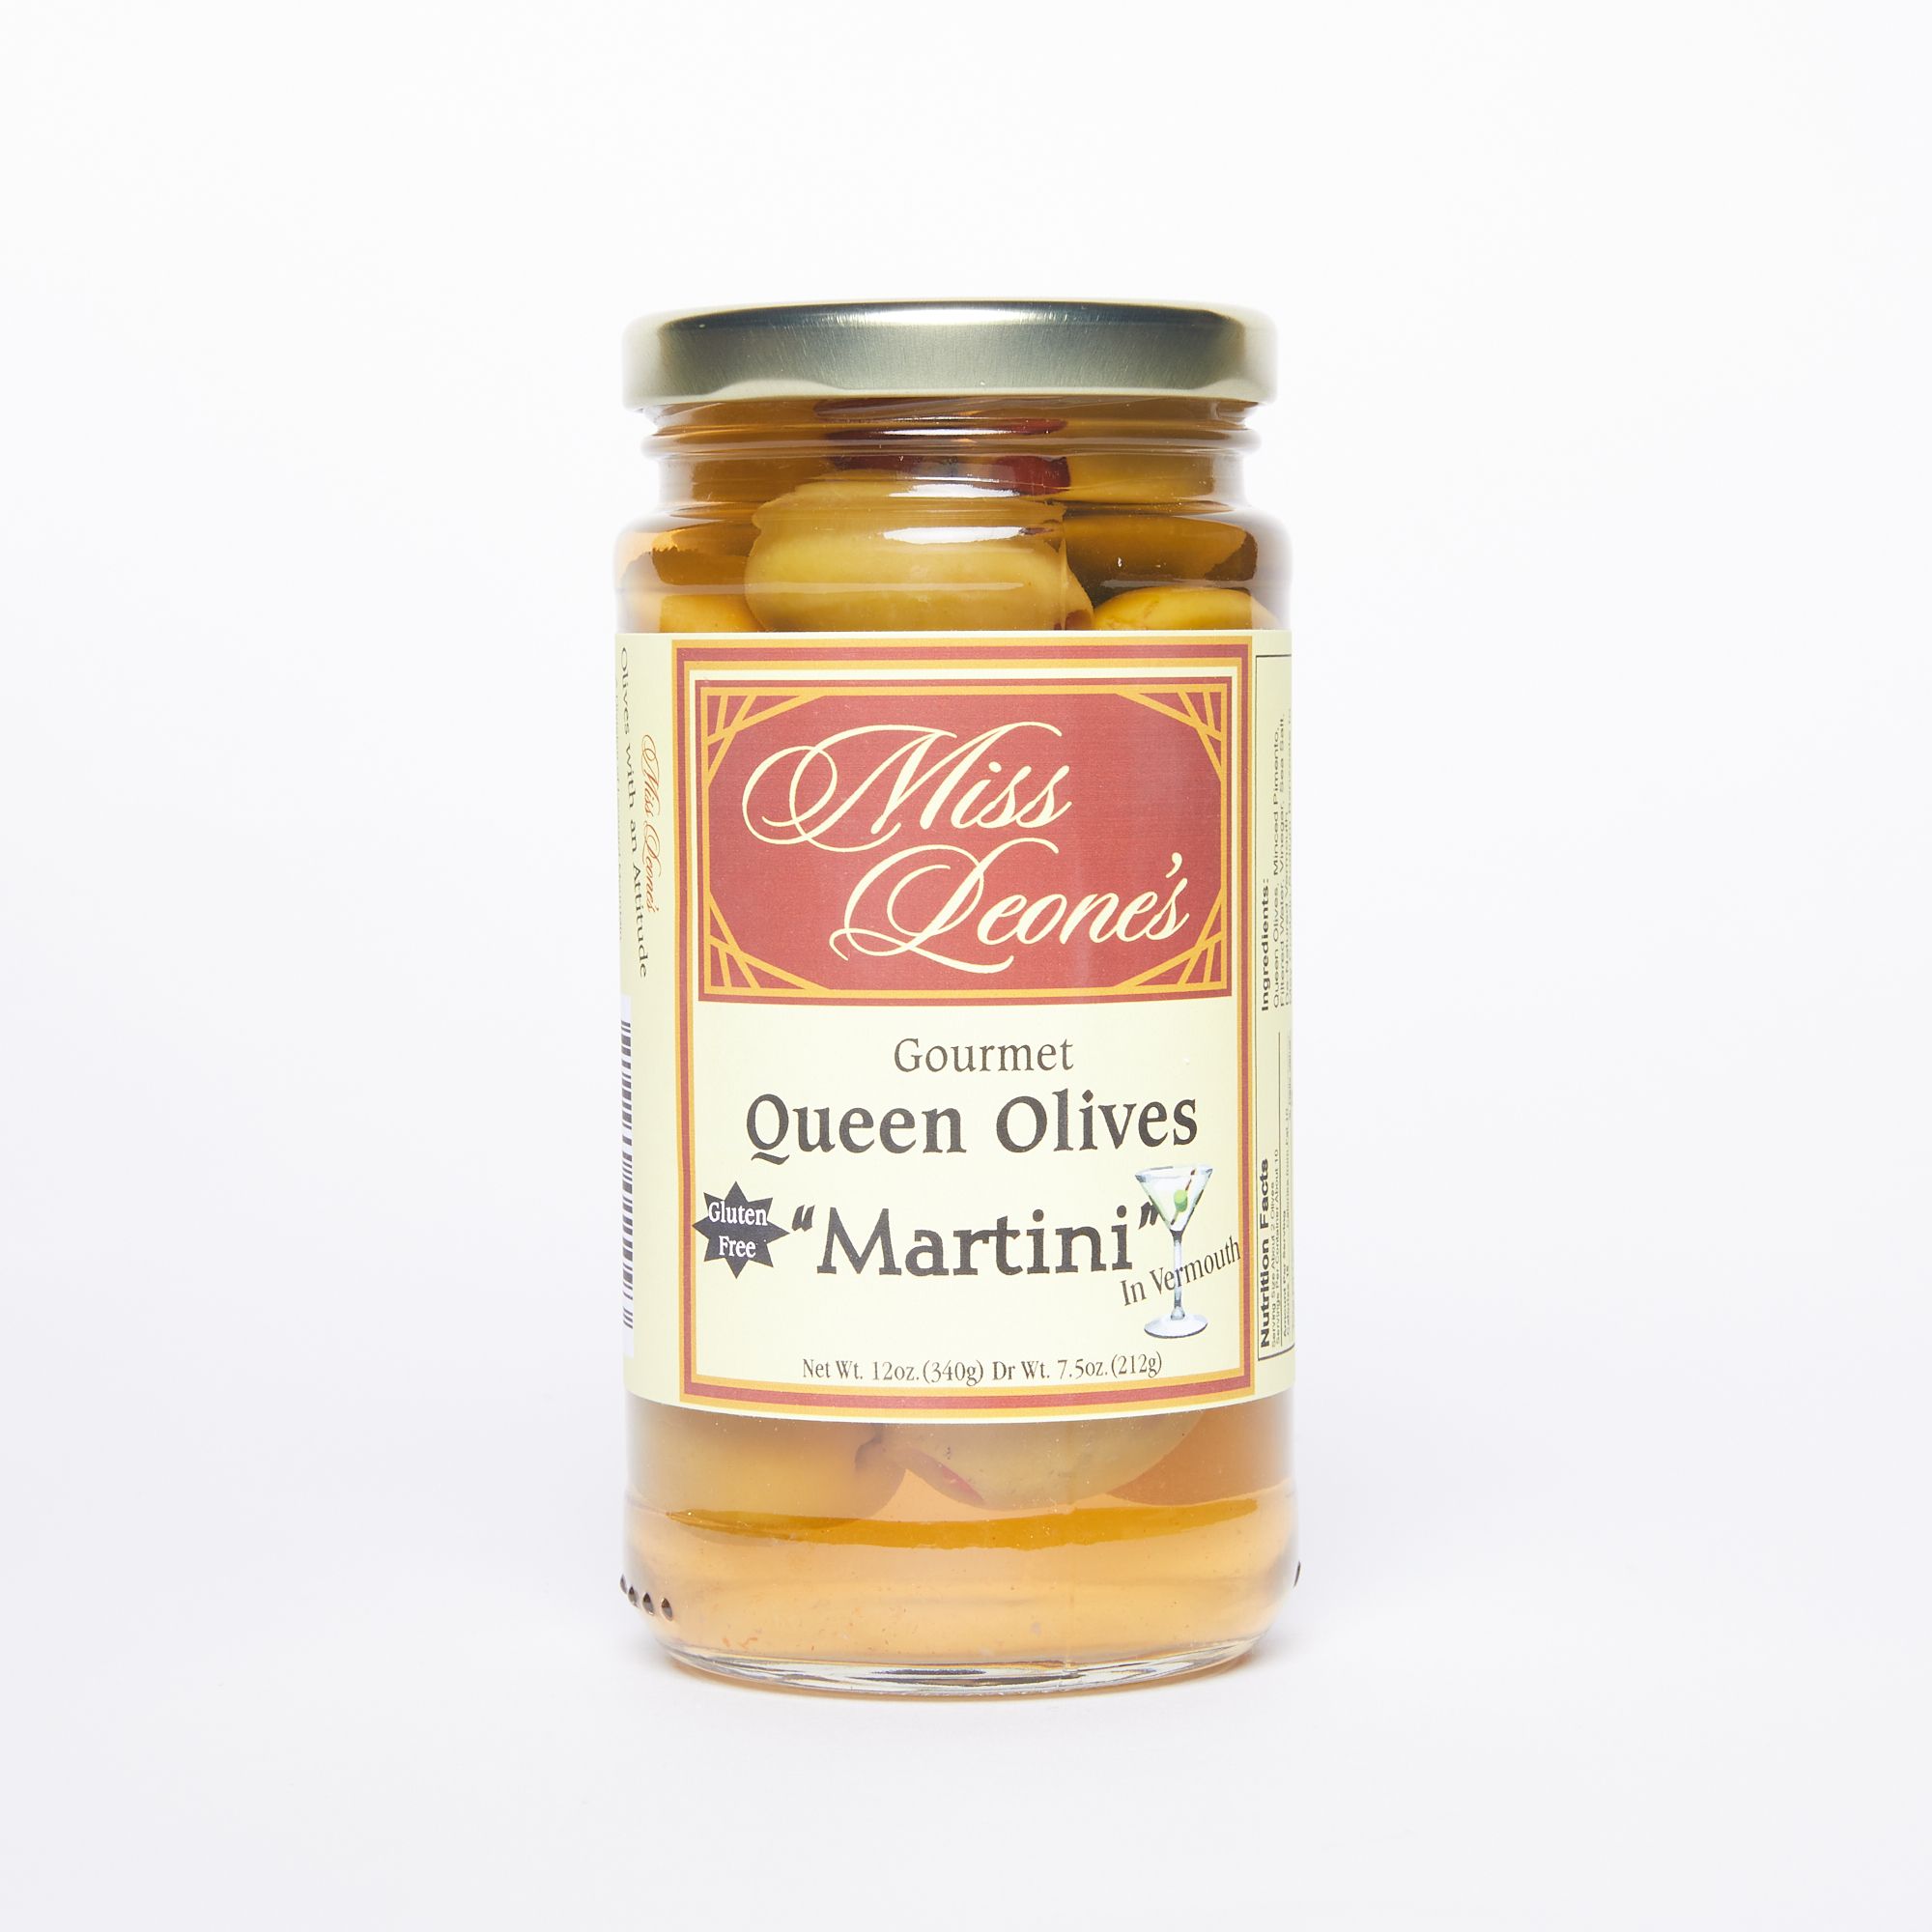 Glass jar full of olives in liquid with a multicolor label that reads "Miss Leone's Gourmet Queen Olives Martini"